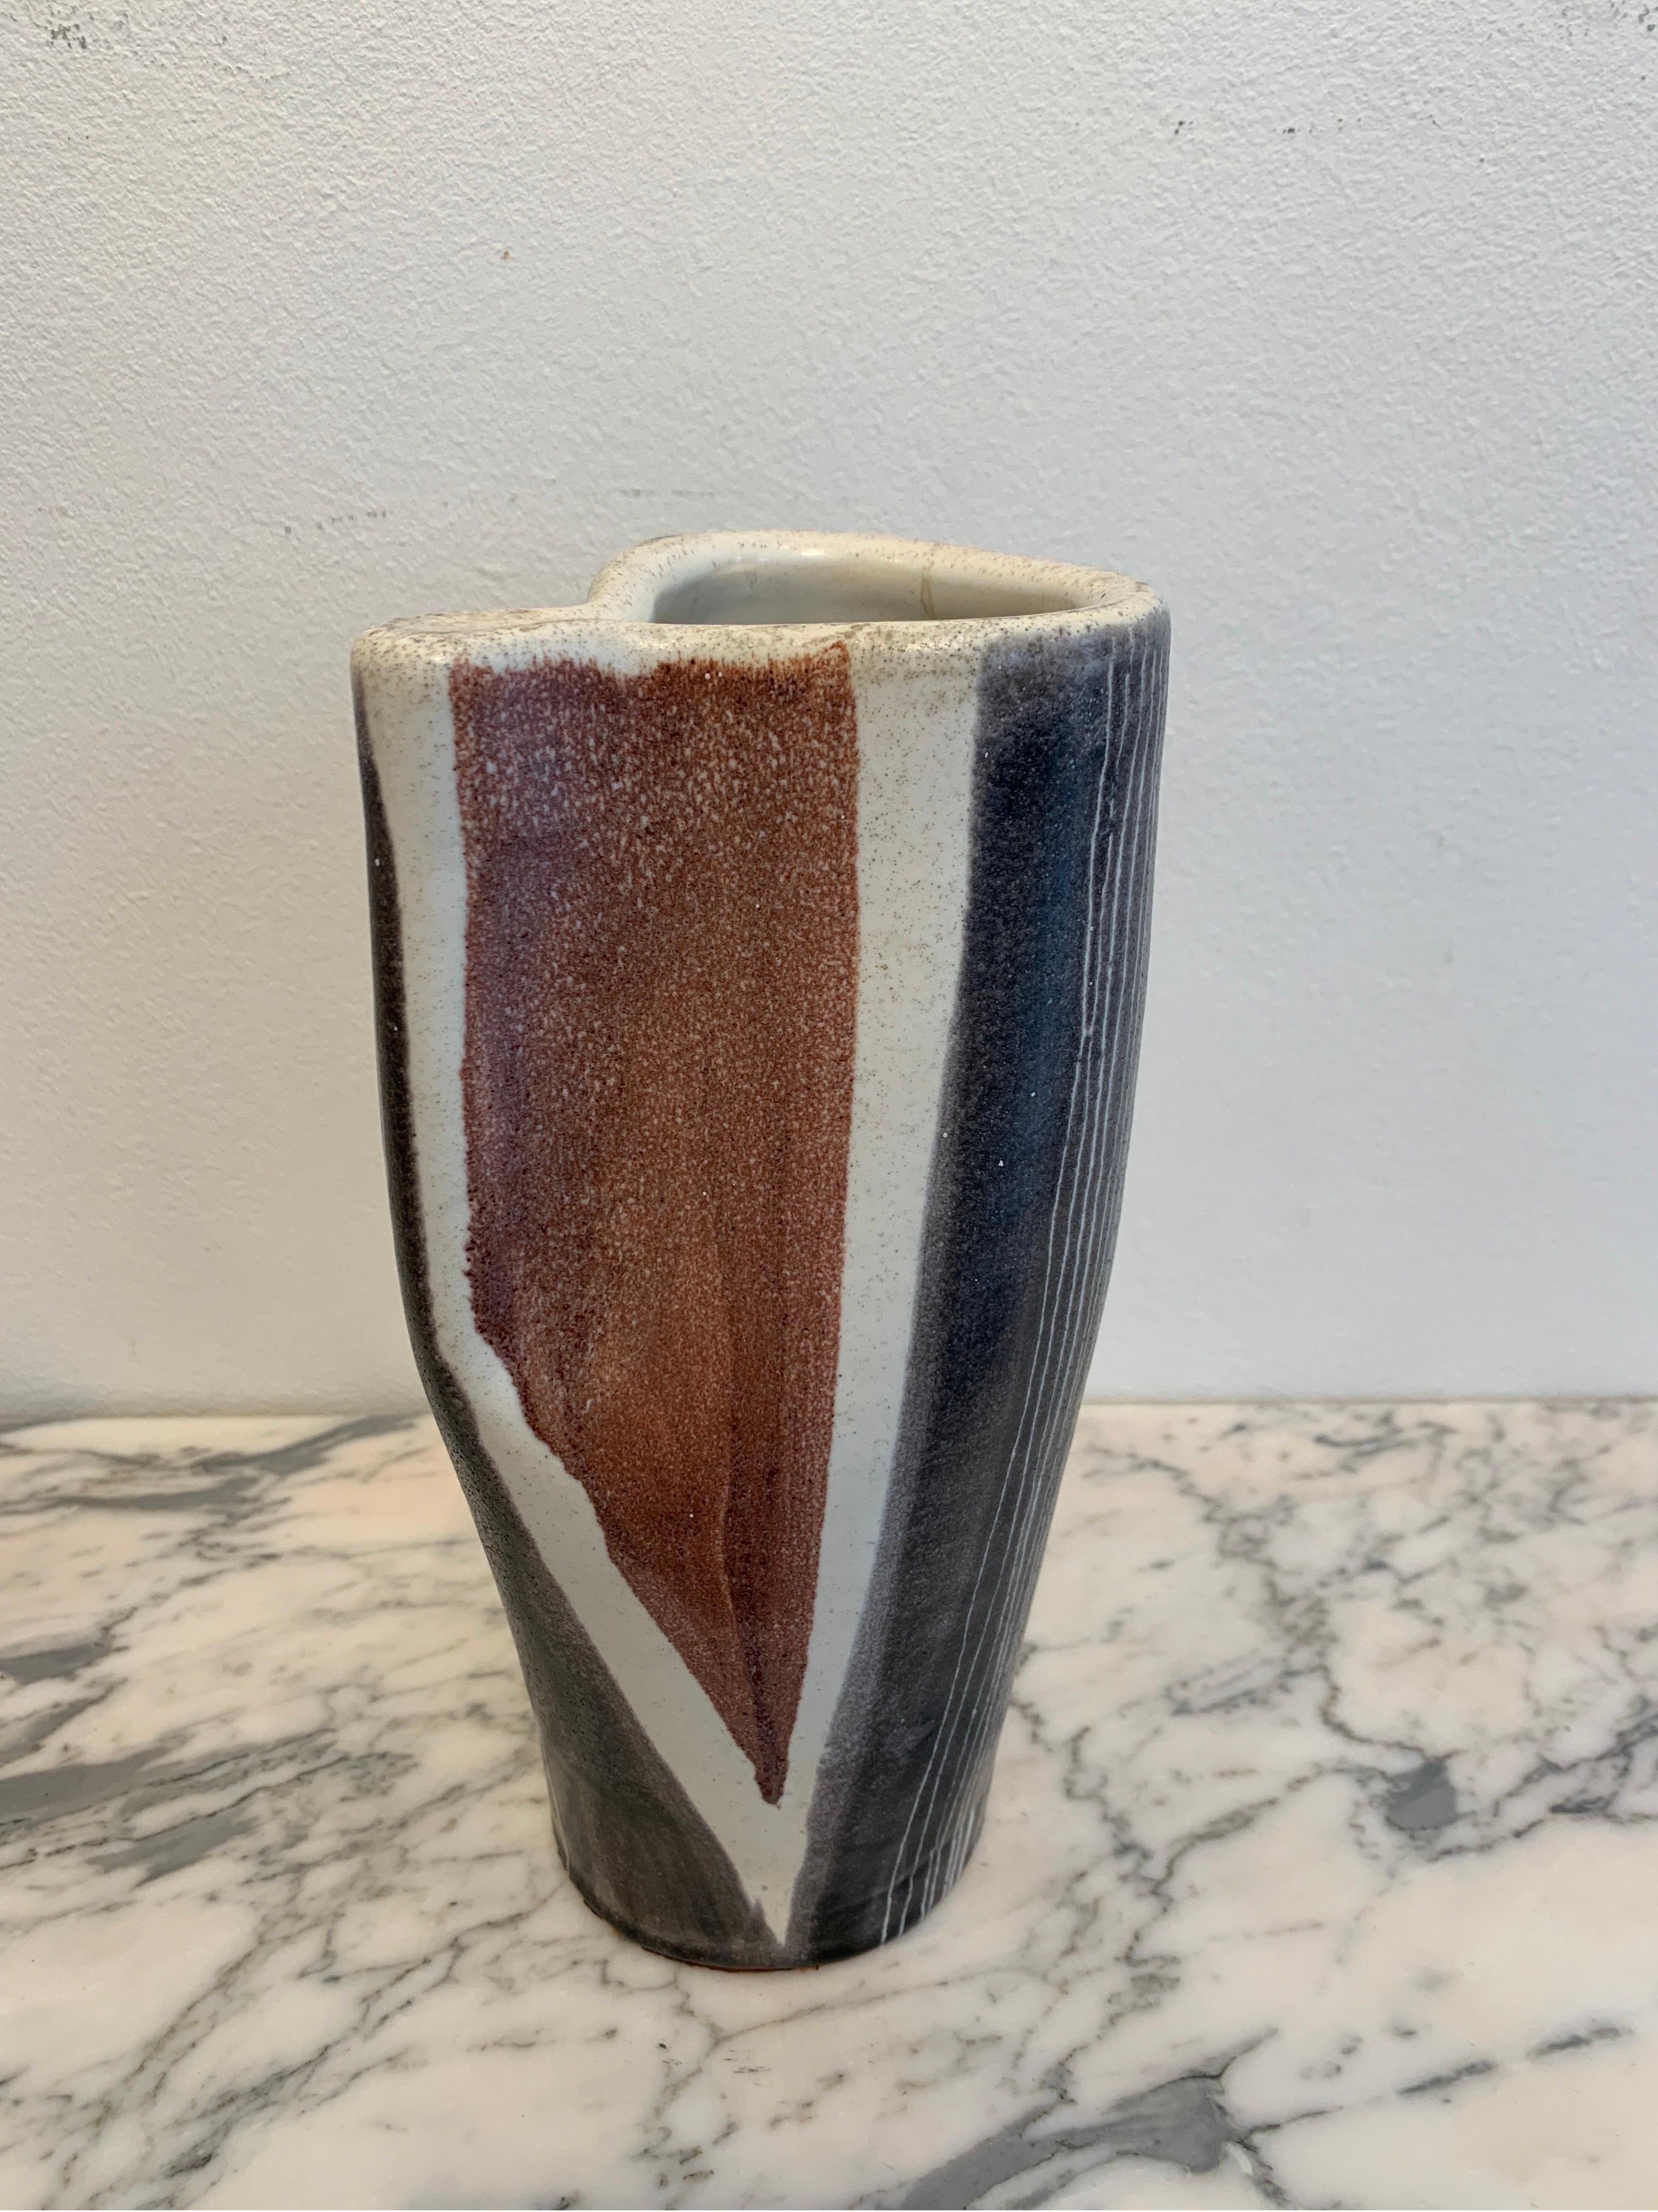 Mado Jolain is renown French Ceramist active in the 1950s. The present vase is made of earthenware enameled creamy. The decor is an abstraction in tones of black a brownish red. She is considered as one of the great names of the mid century modern